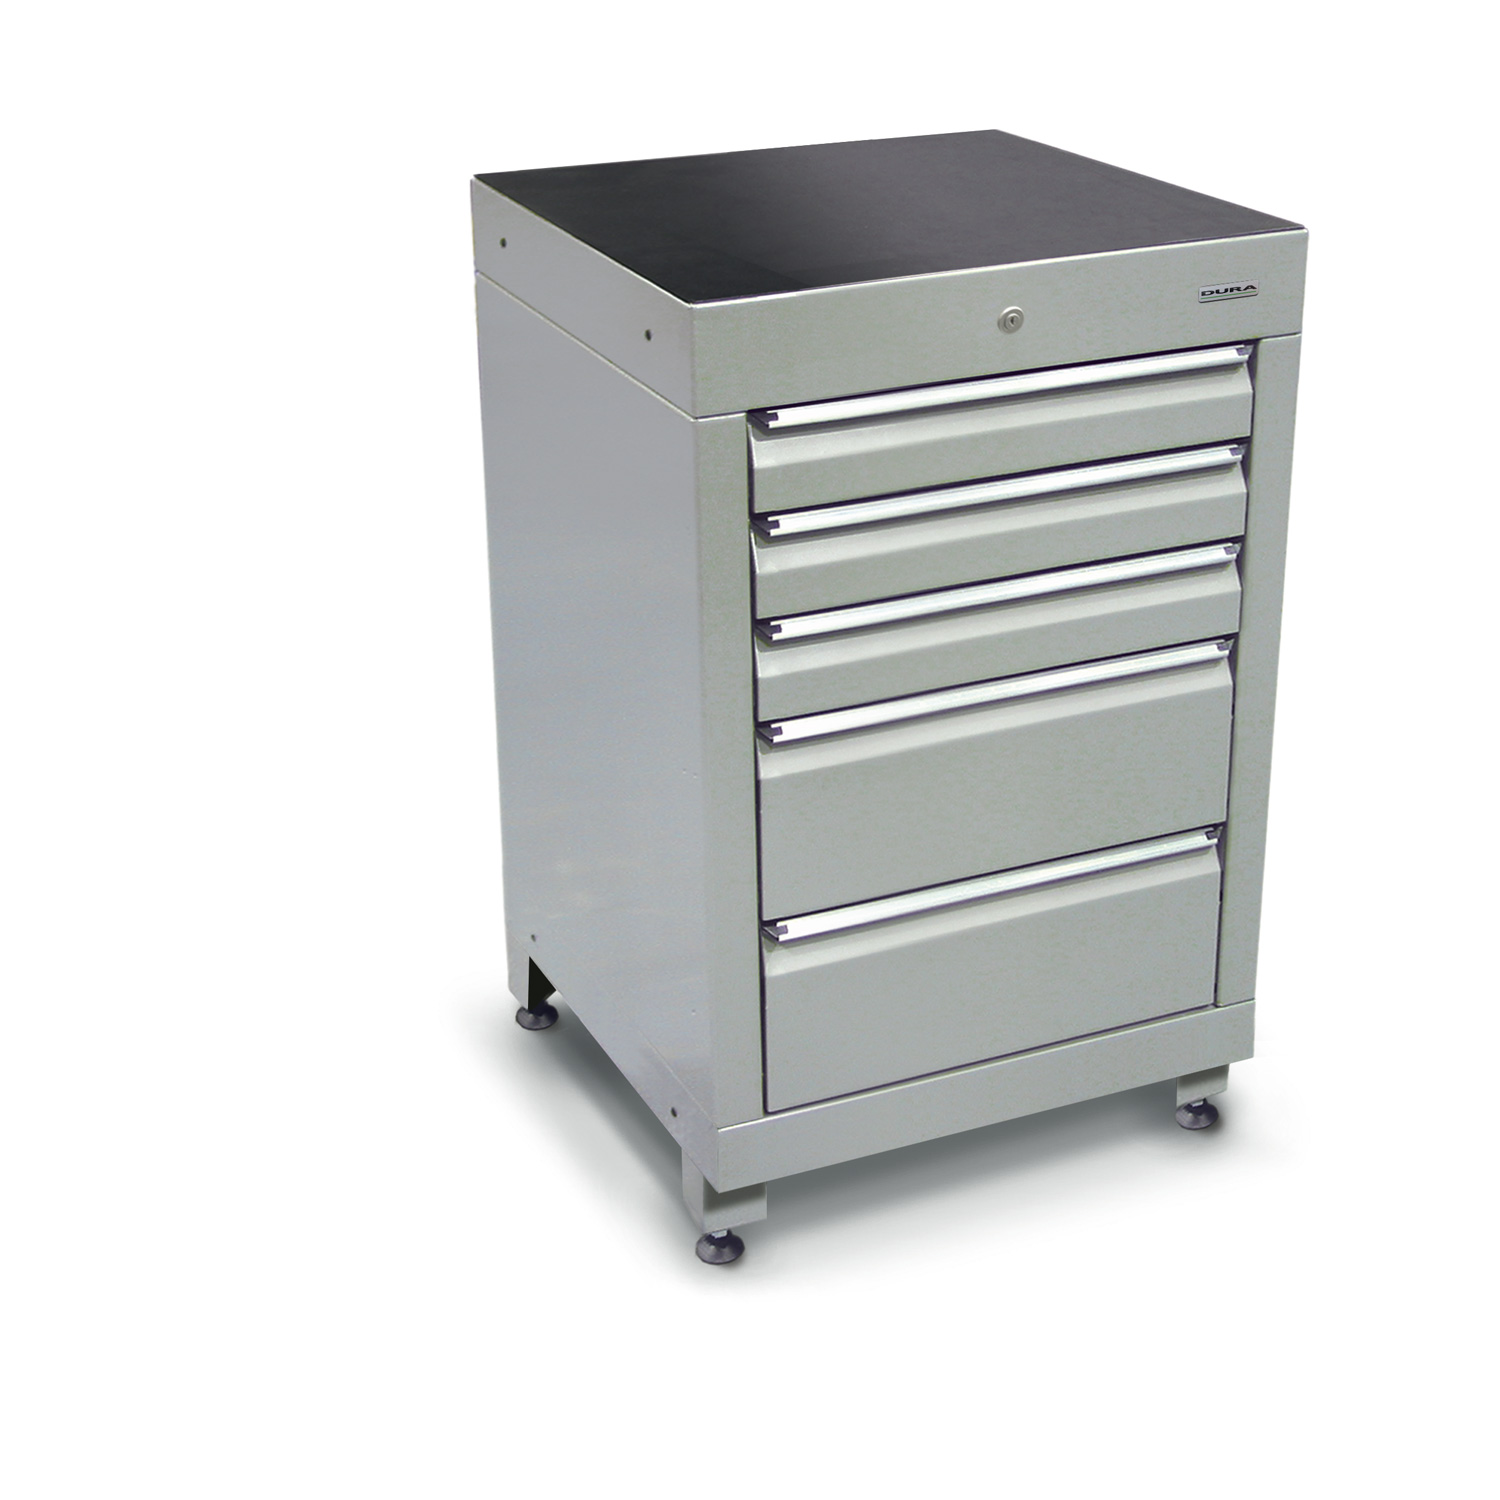 600 series cabinet with 5 drawers (3 medium, 2 large) and feet